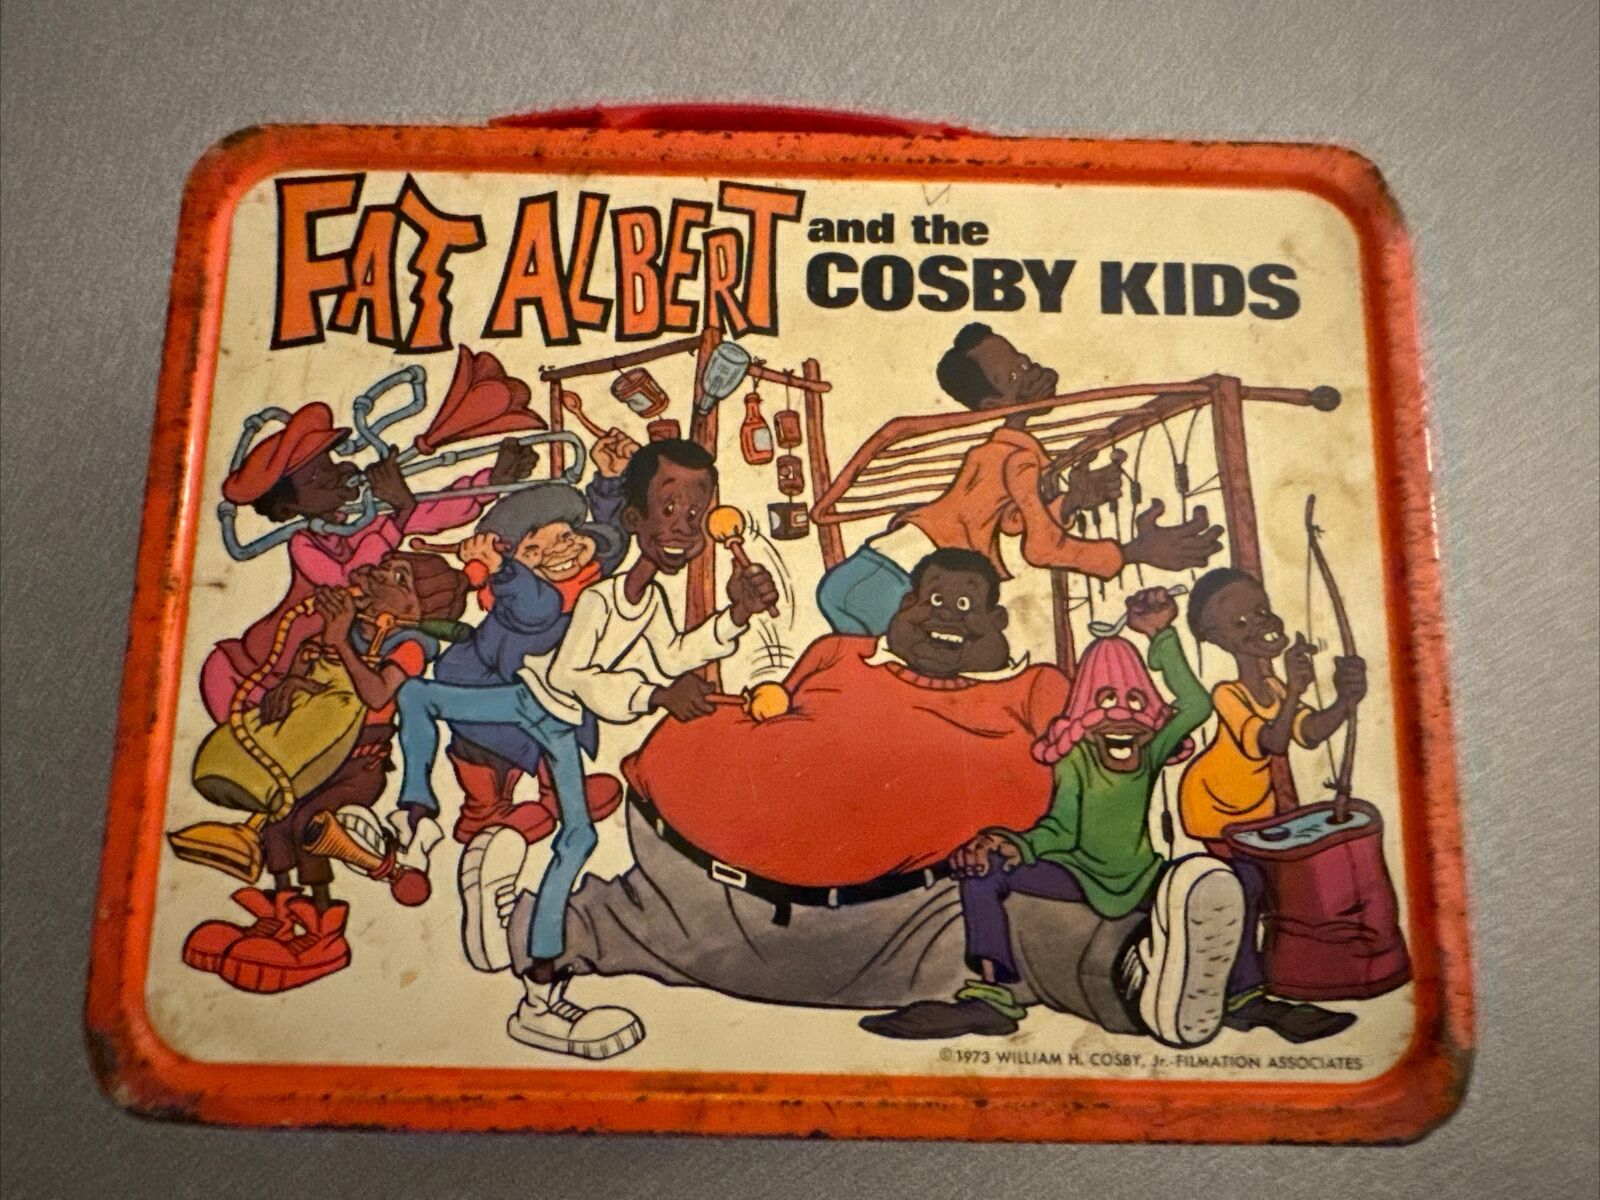 Vintage Thermos Fat Albert and the Cosby Kids Lunchbox no Thermos-Fair Shape